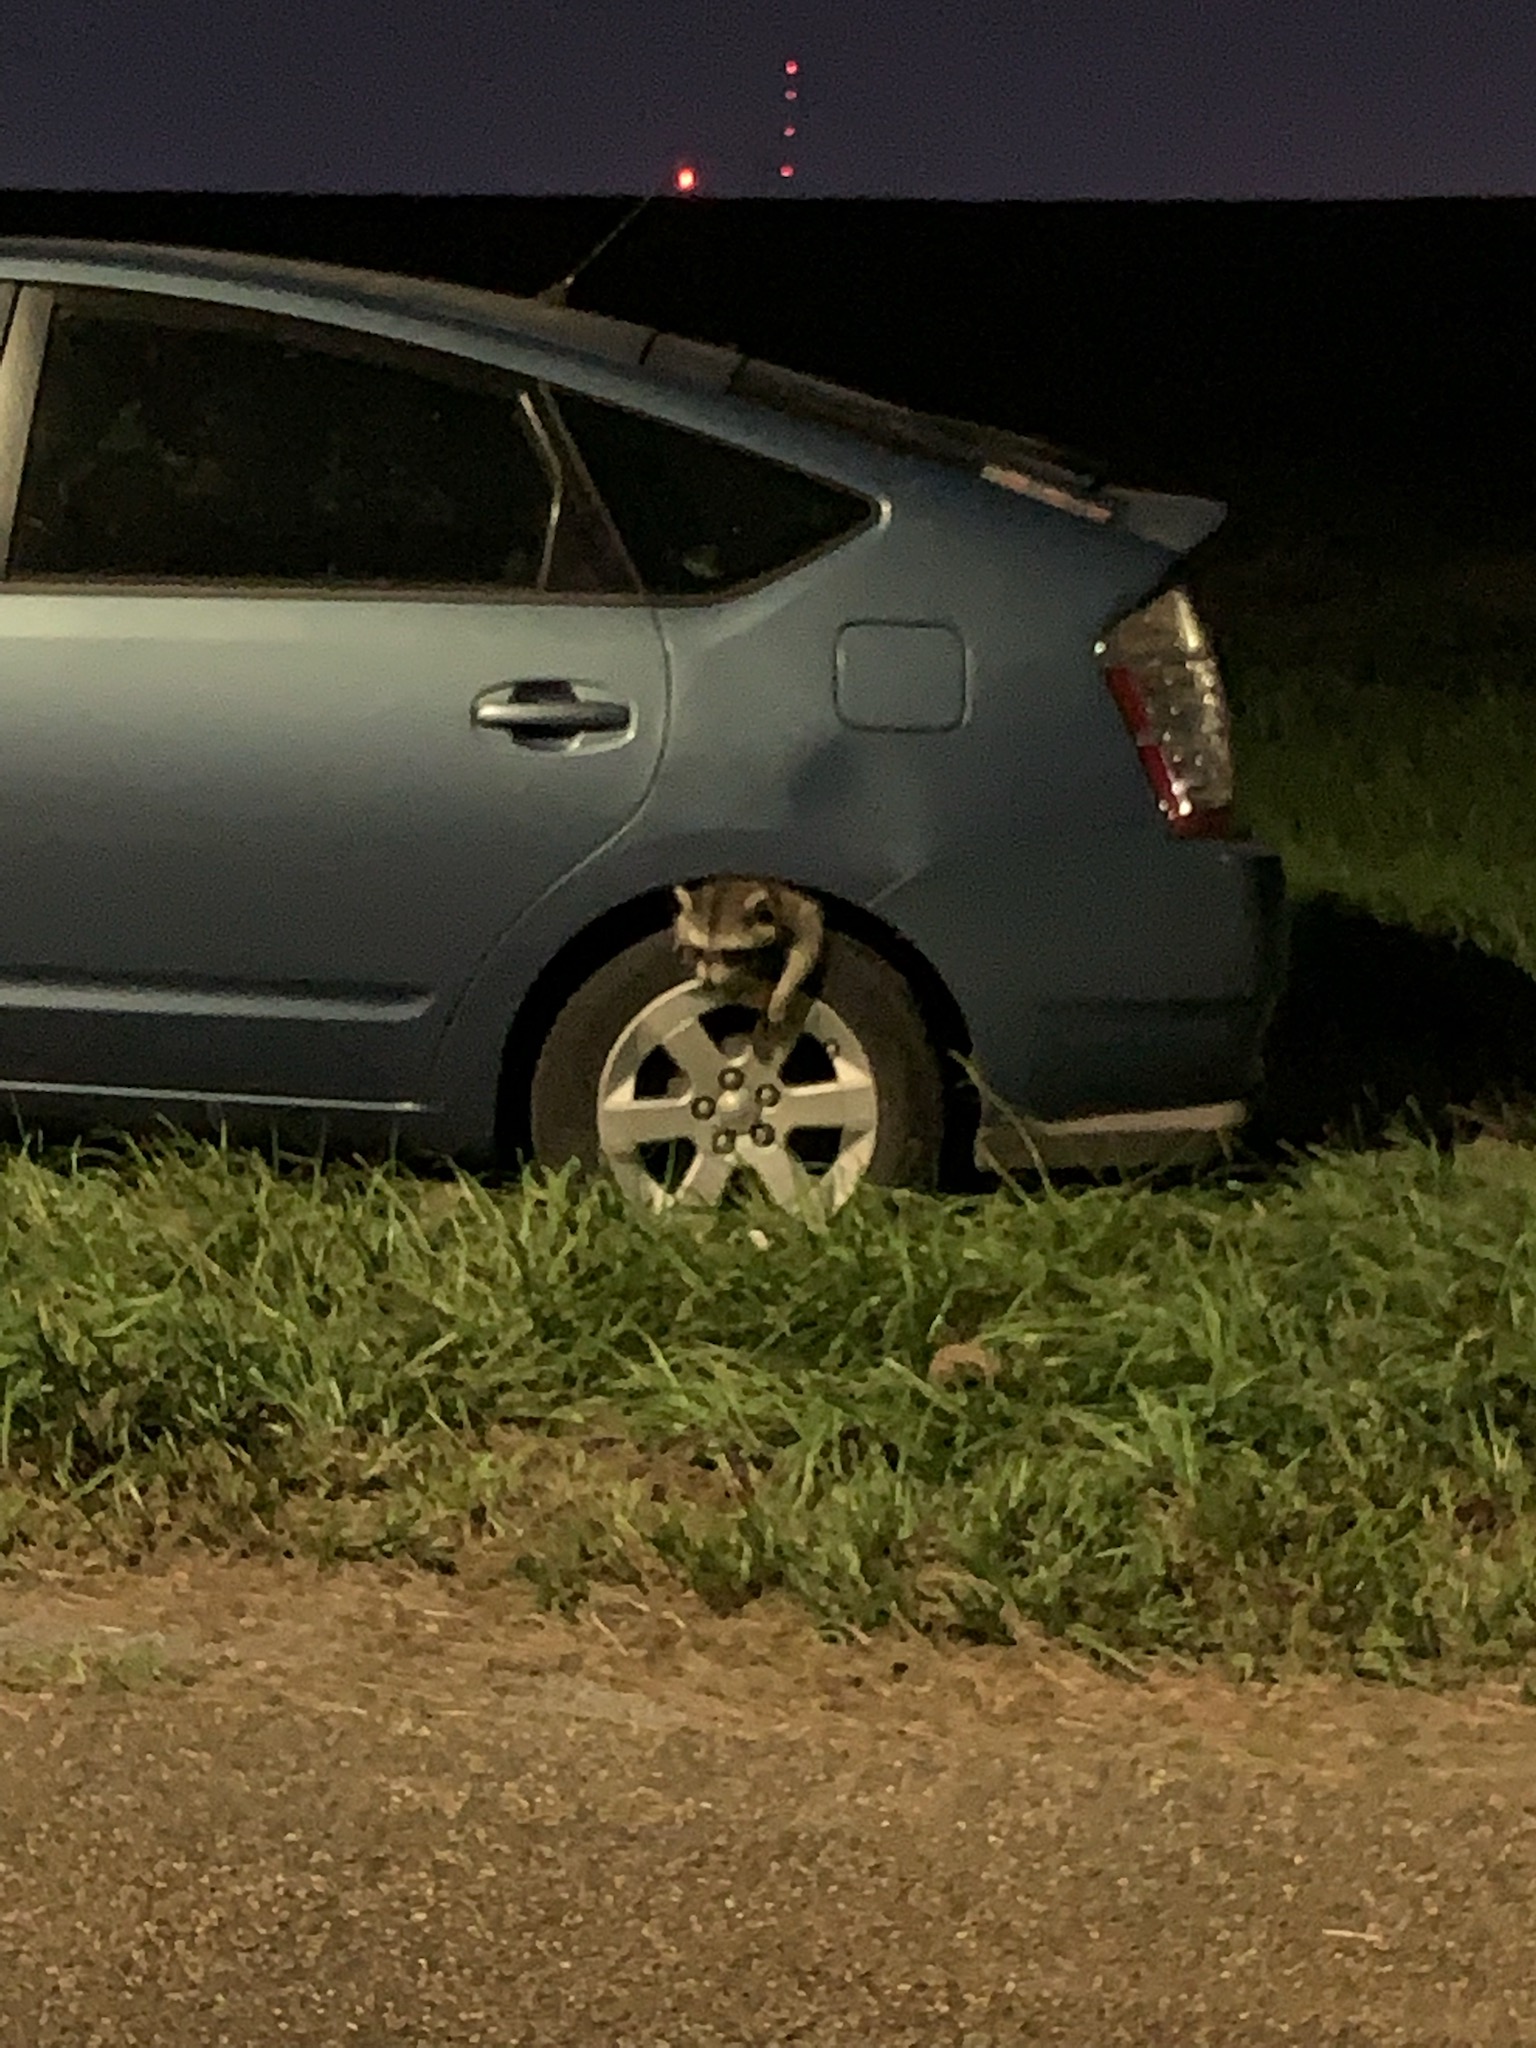 Raccoon on tire of a Toyota Prius